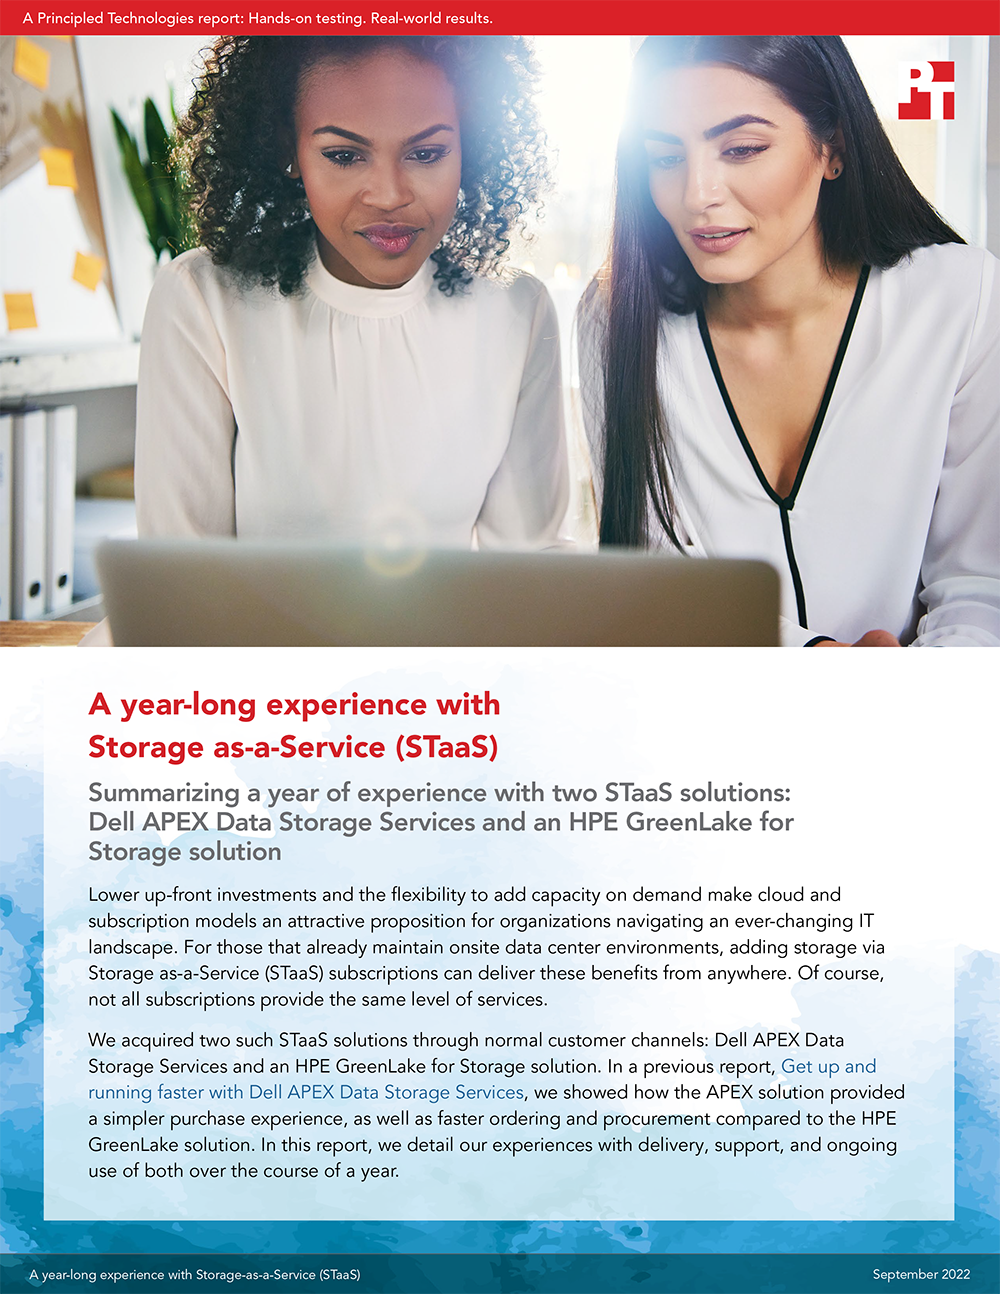 Principled Technologies Releases Study Comparing the Year-Long Customer Experience with Two Storage as-a-Service (STaaS) Solutions